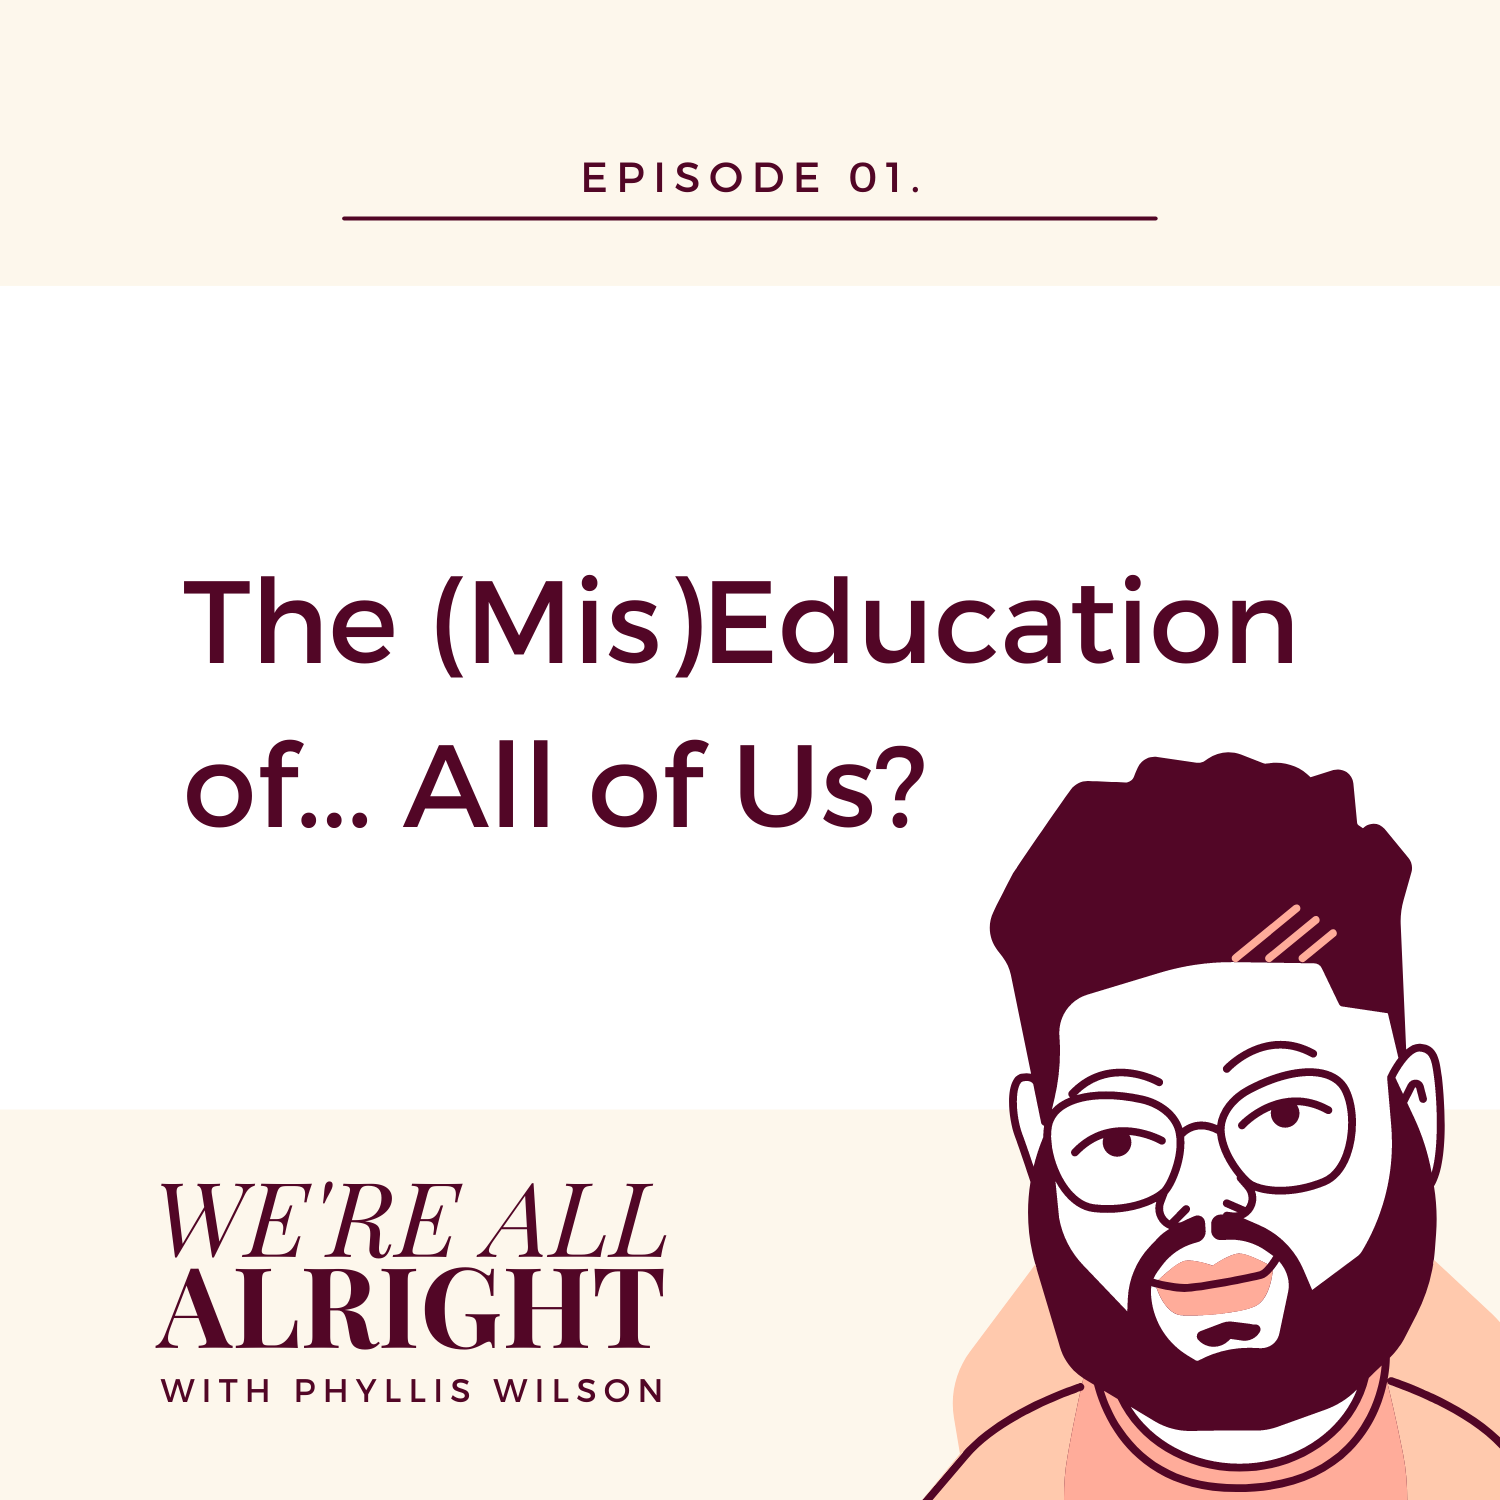 EP 01: The (Mis)Education of… All of Us?